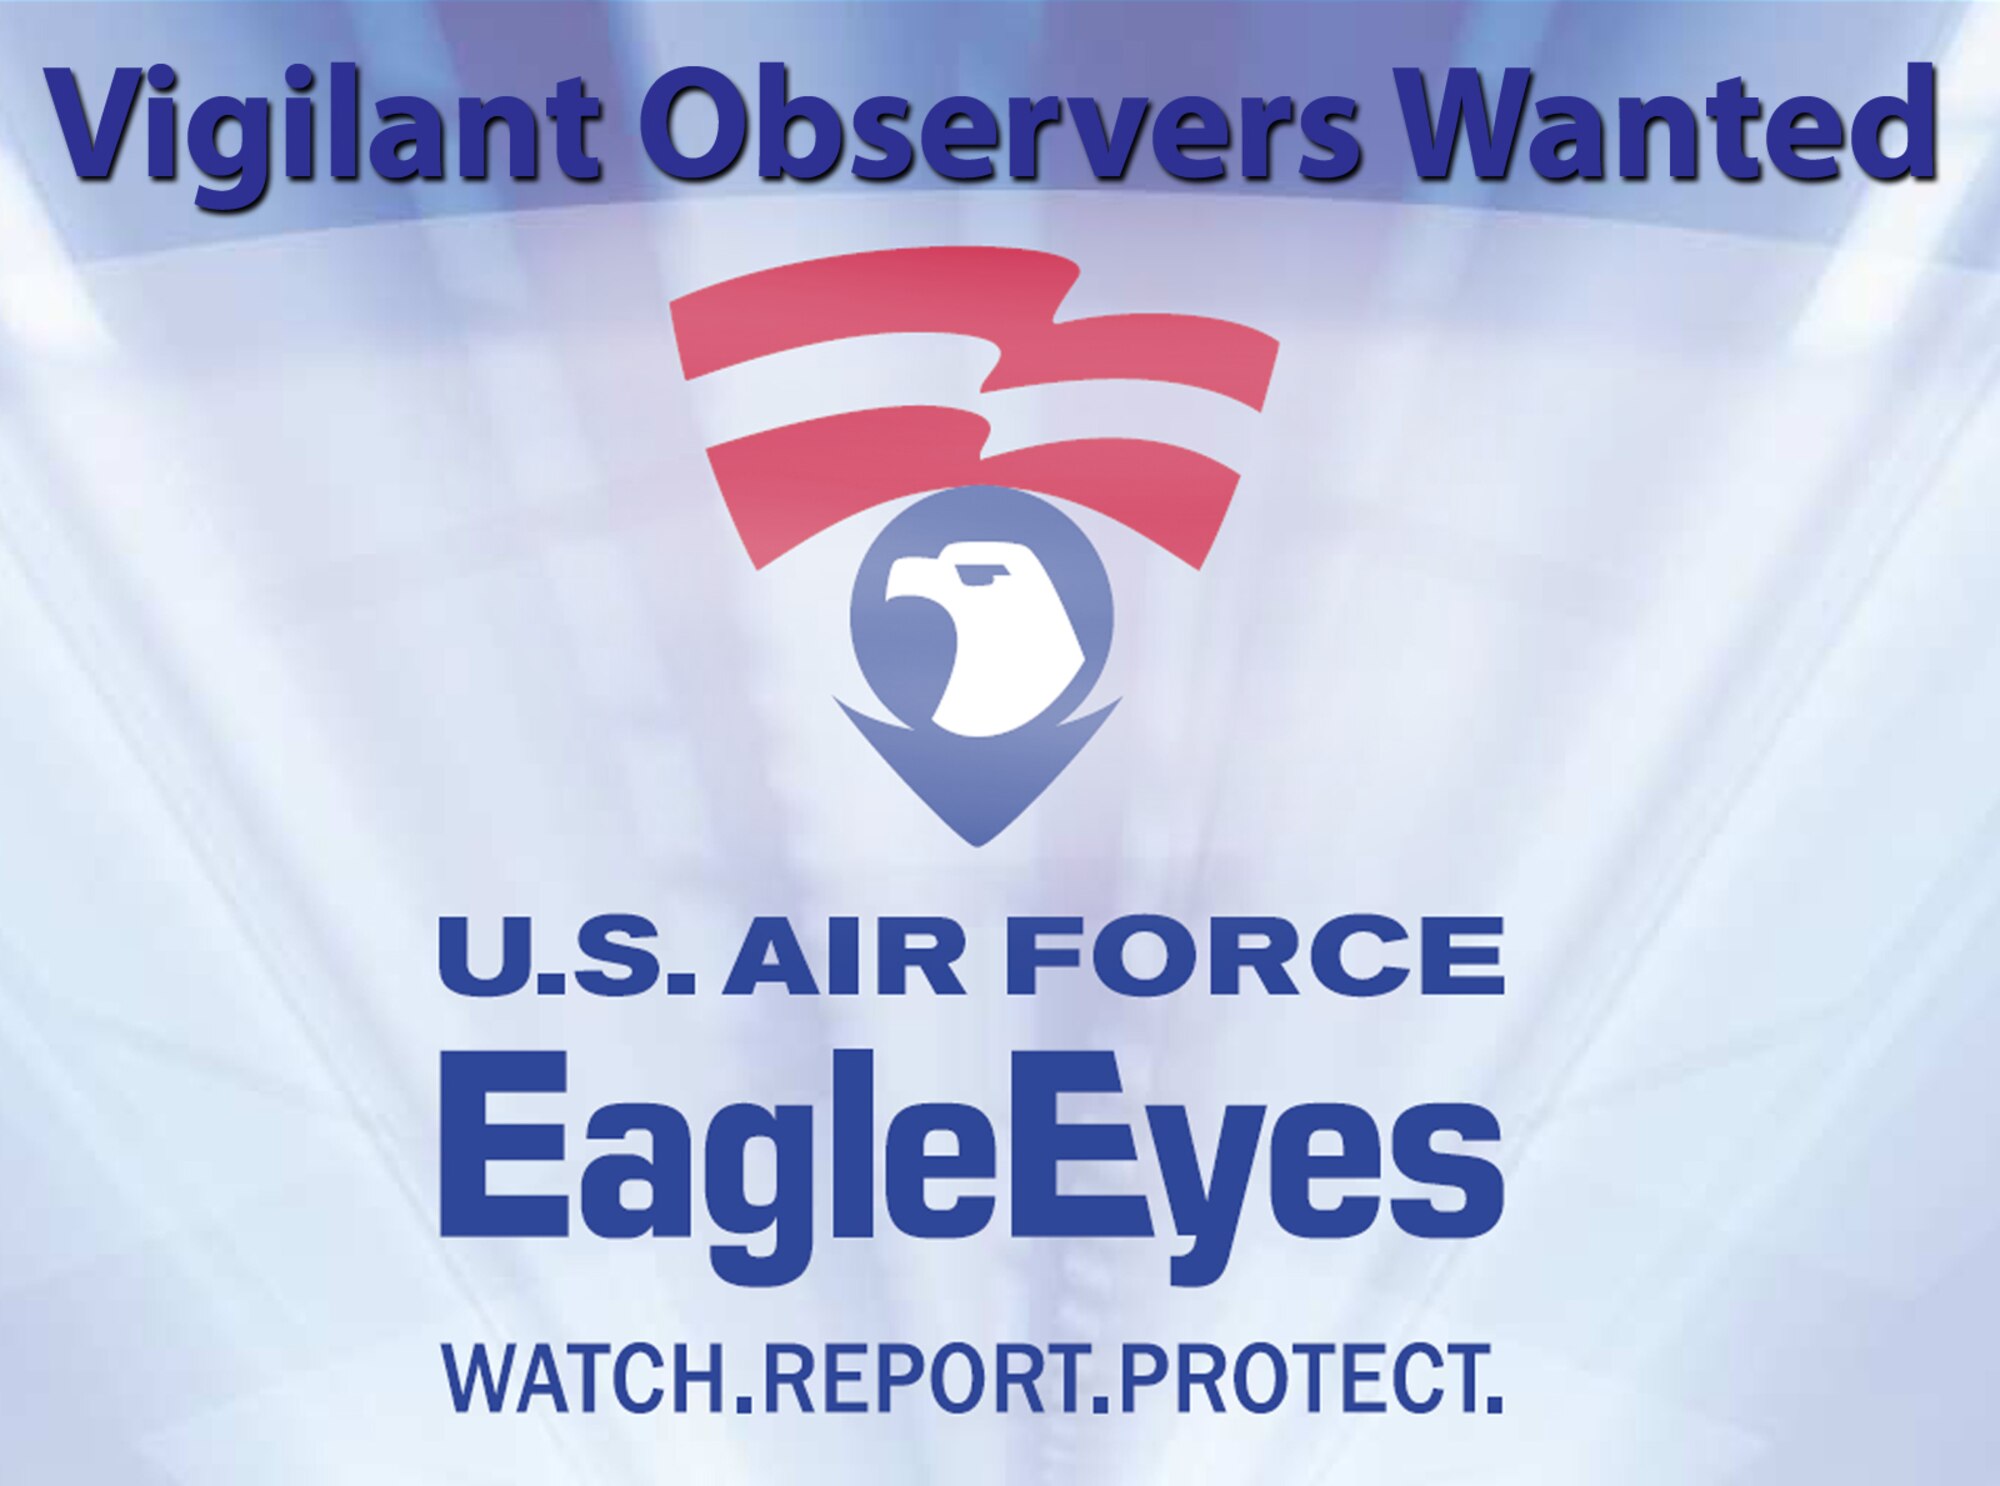 The Eagle Eyes program is an Air Force anti-terrorism initiative that enlists the eyes and ears of Air Force members and citizens in the war on terror. Eagle eyes teaches people about the typical activities terrorists engage in to plan their attacks. Armed with this information, anyone can recognize elements of potential terror planning when they see it. The program provides a network of local, 24-hour phone numbers to call whenever a suspicious activity is observed.